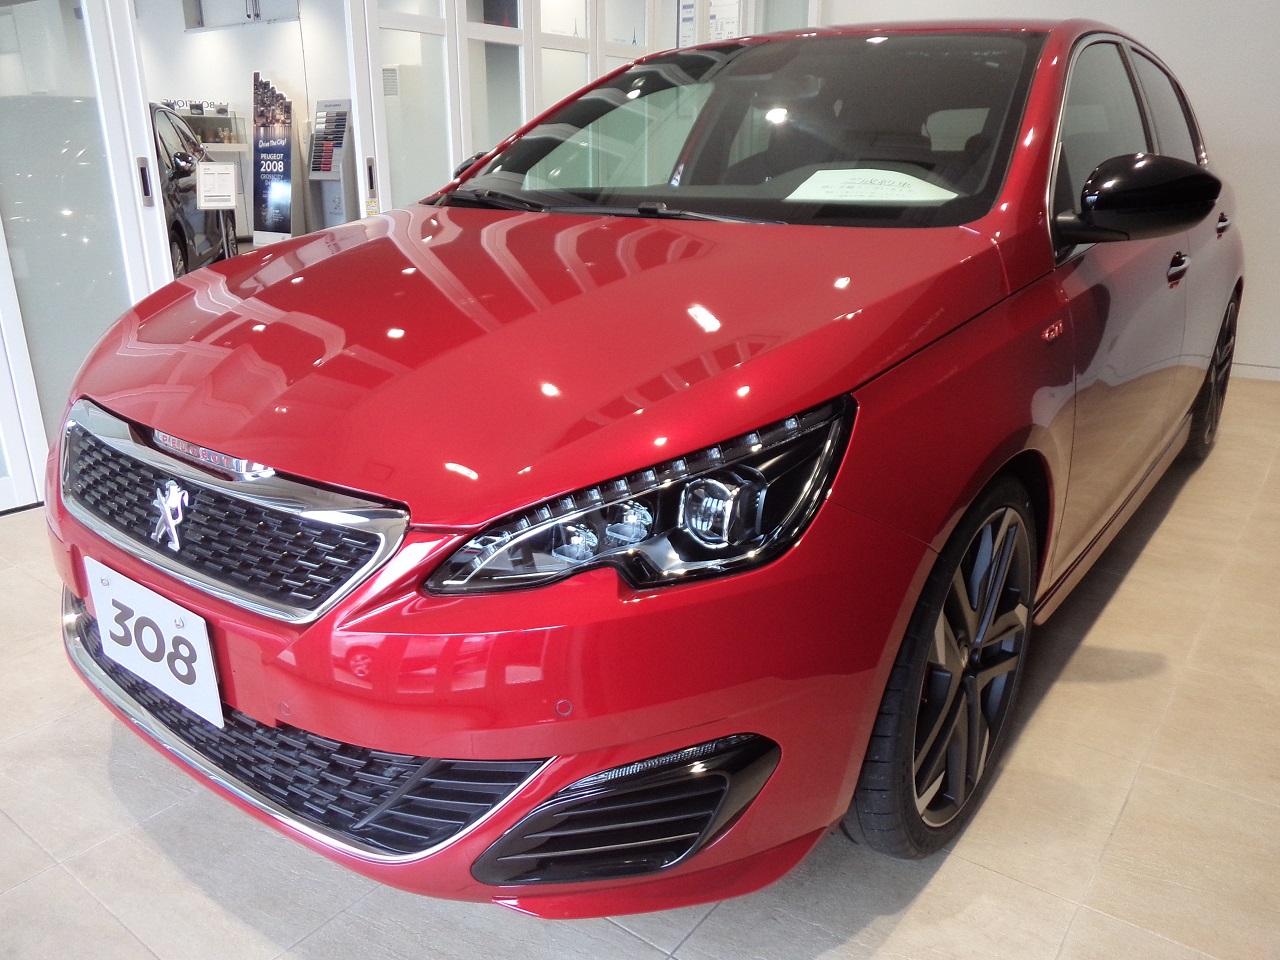 308 GTi 270 by PEUGEOT SPORT　期間限定展示！！